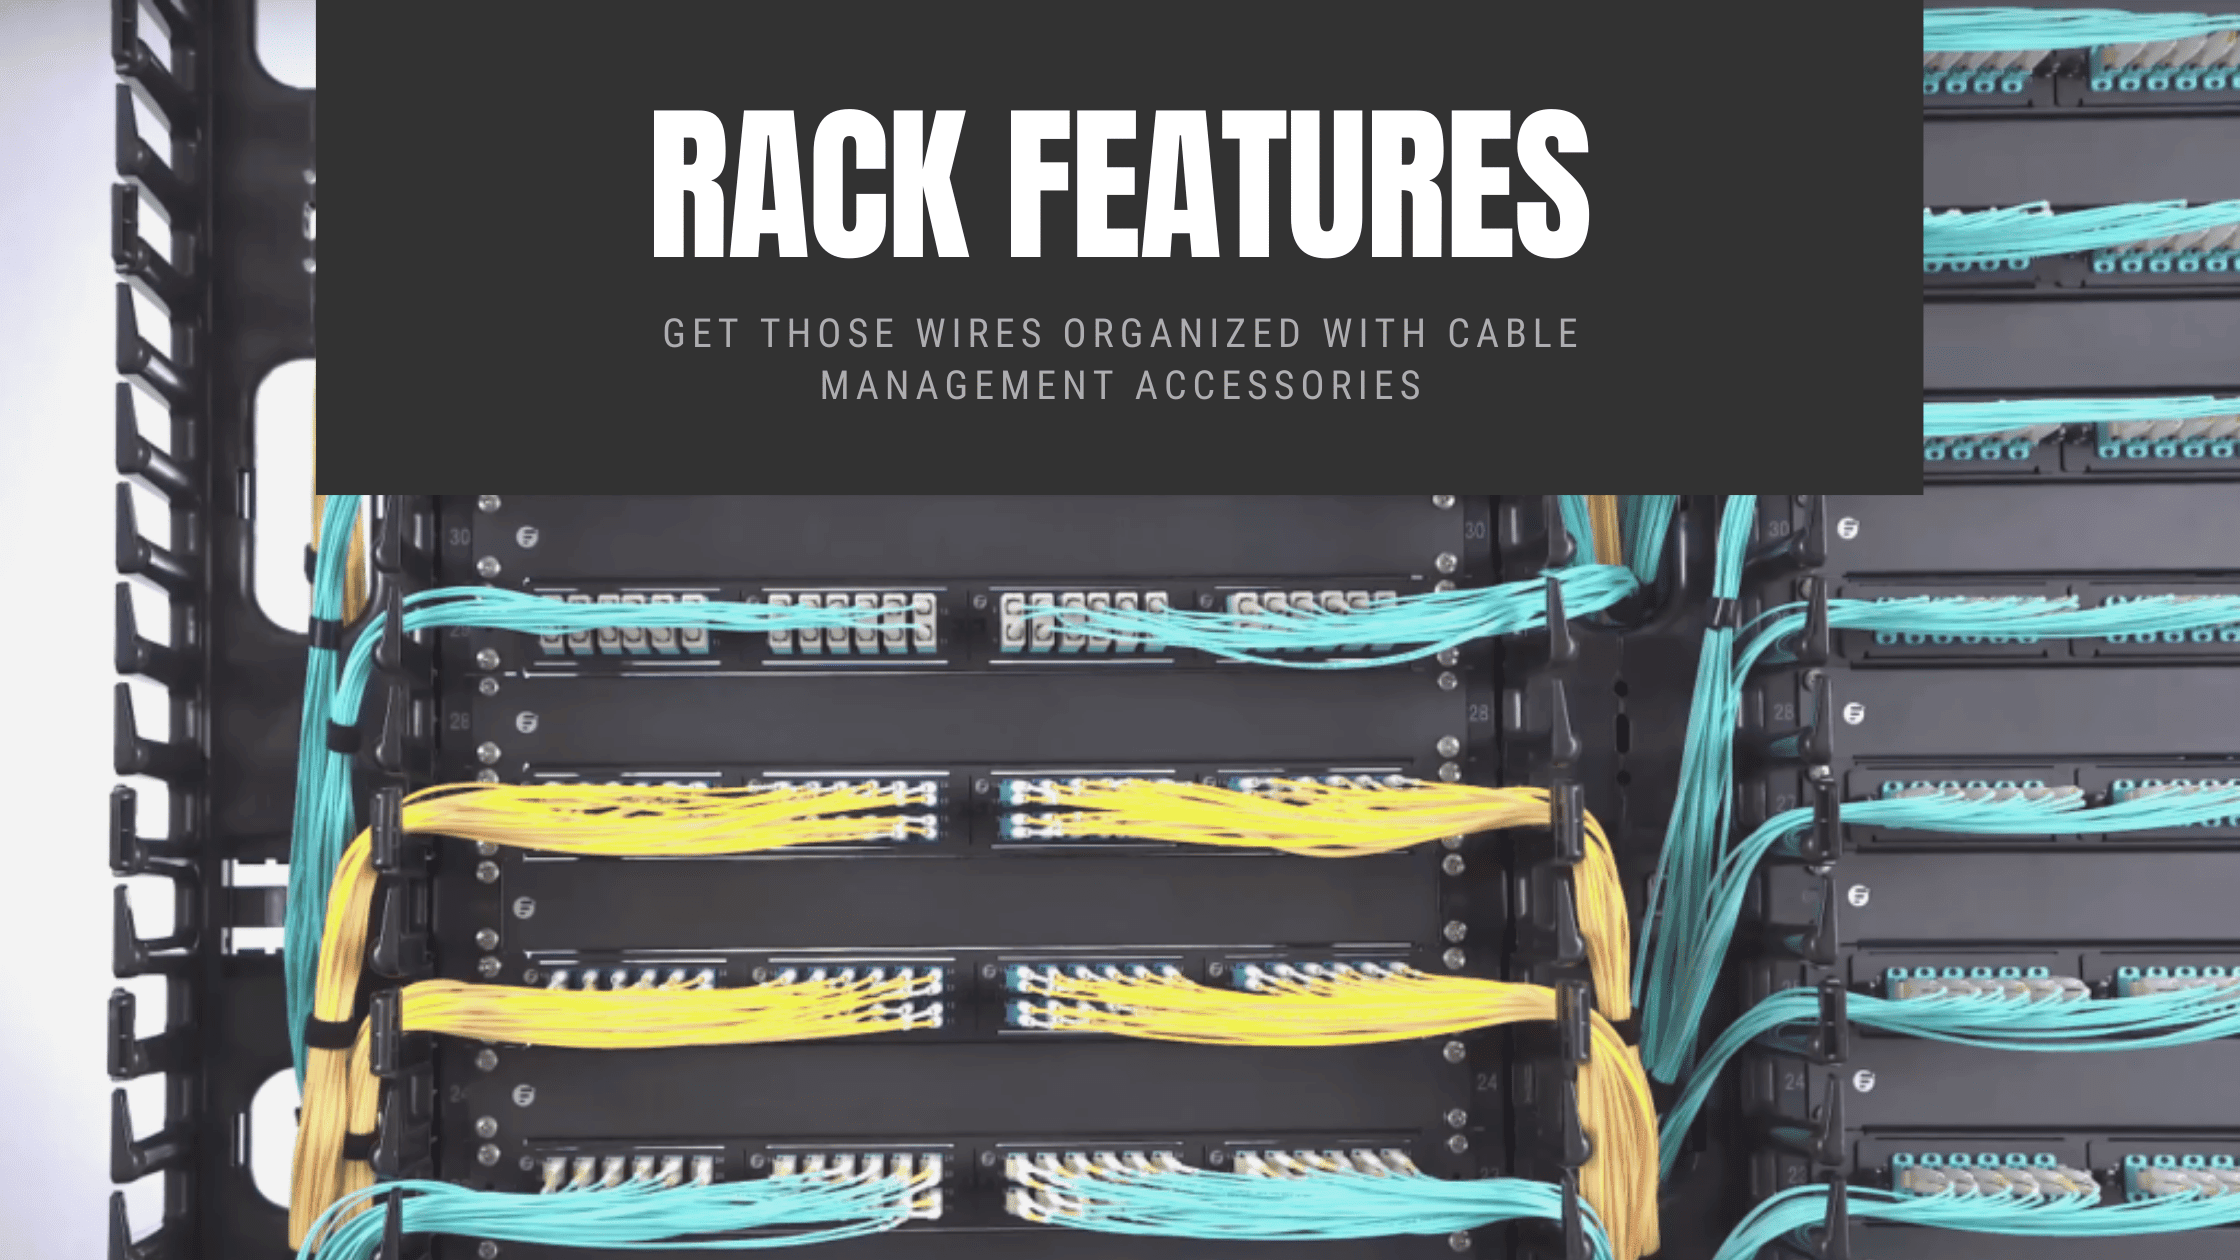 Get Those Wires Organized: Rack-Mounted Cable Management Accessories